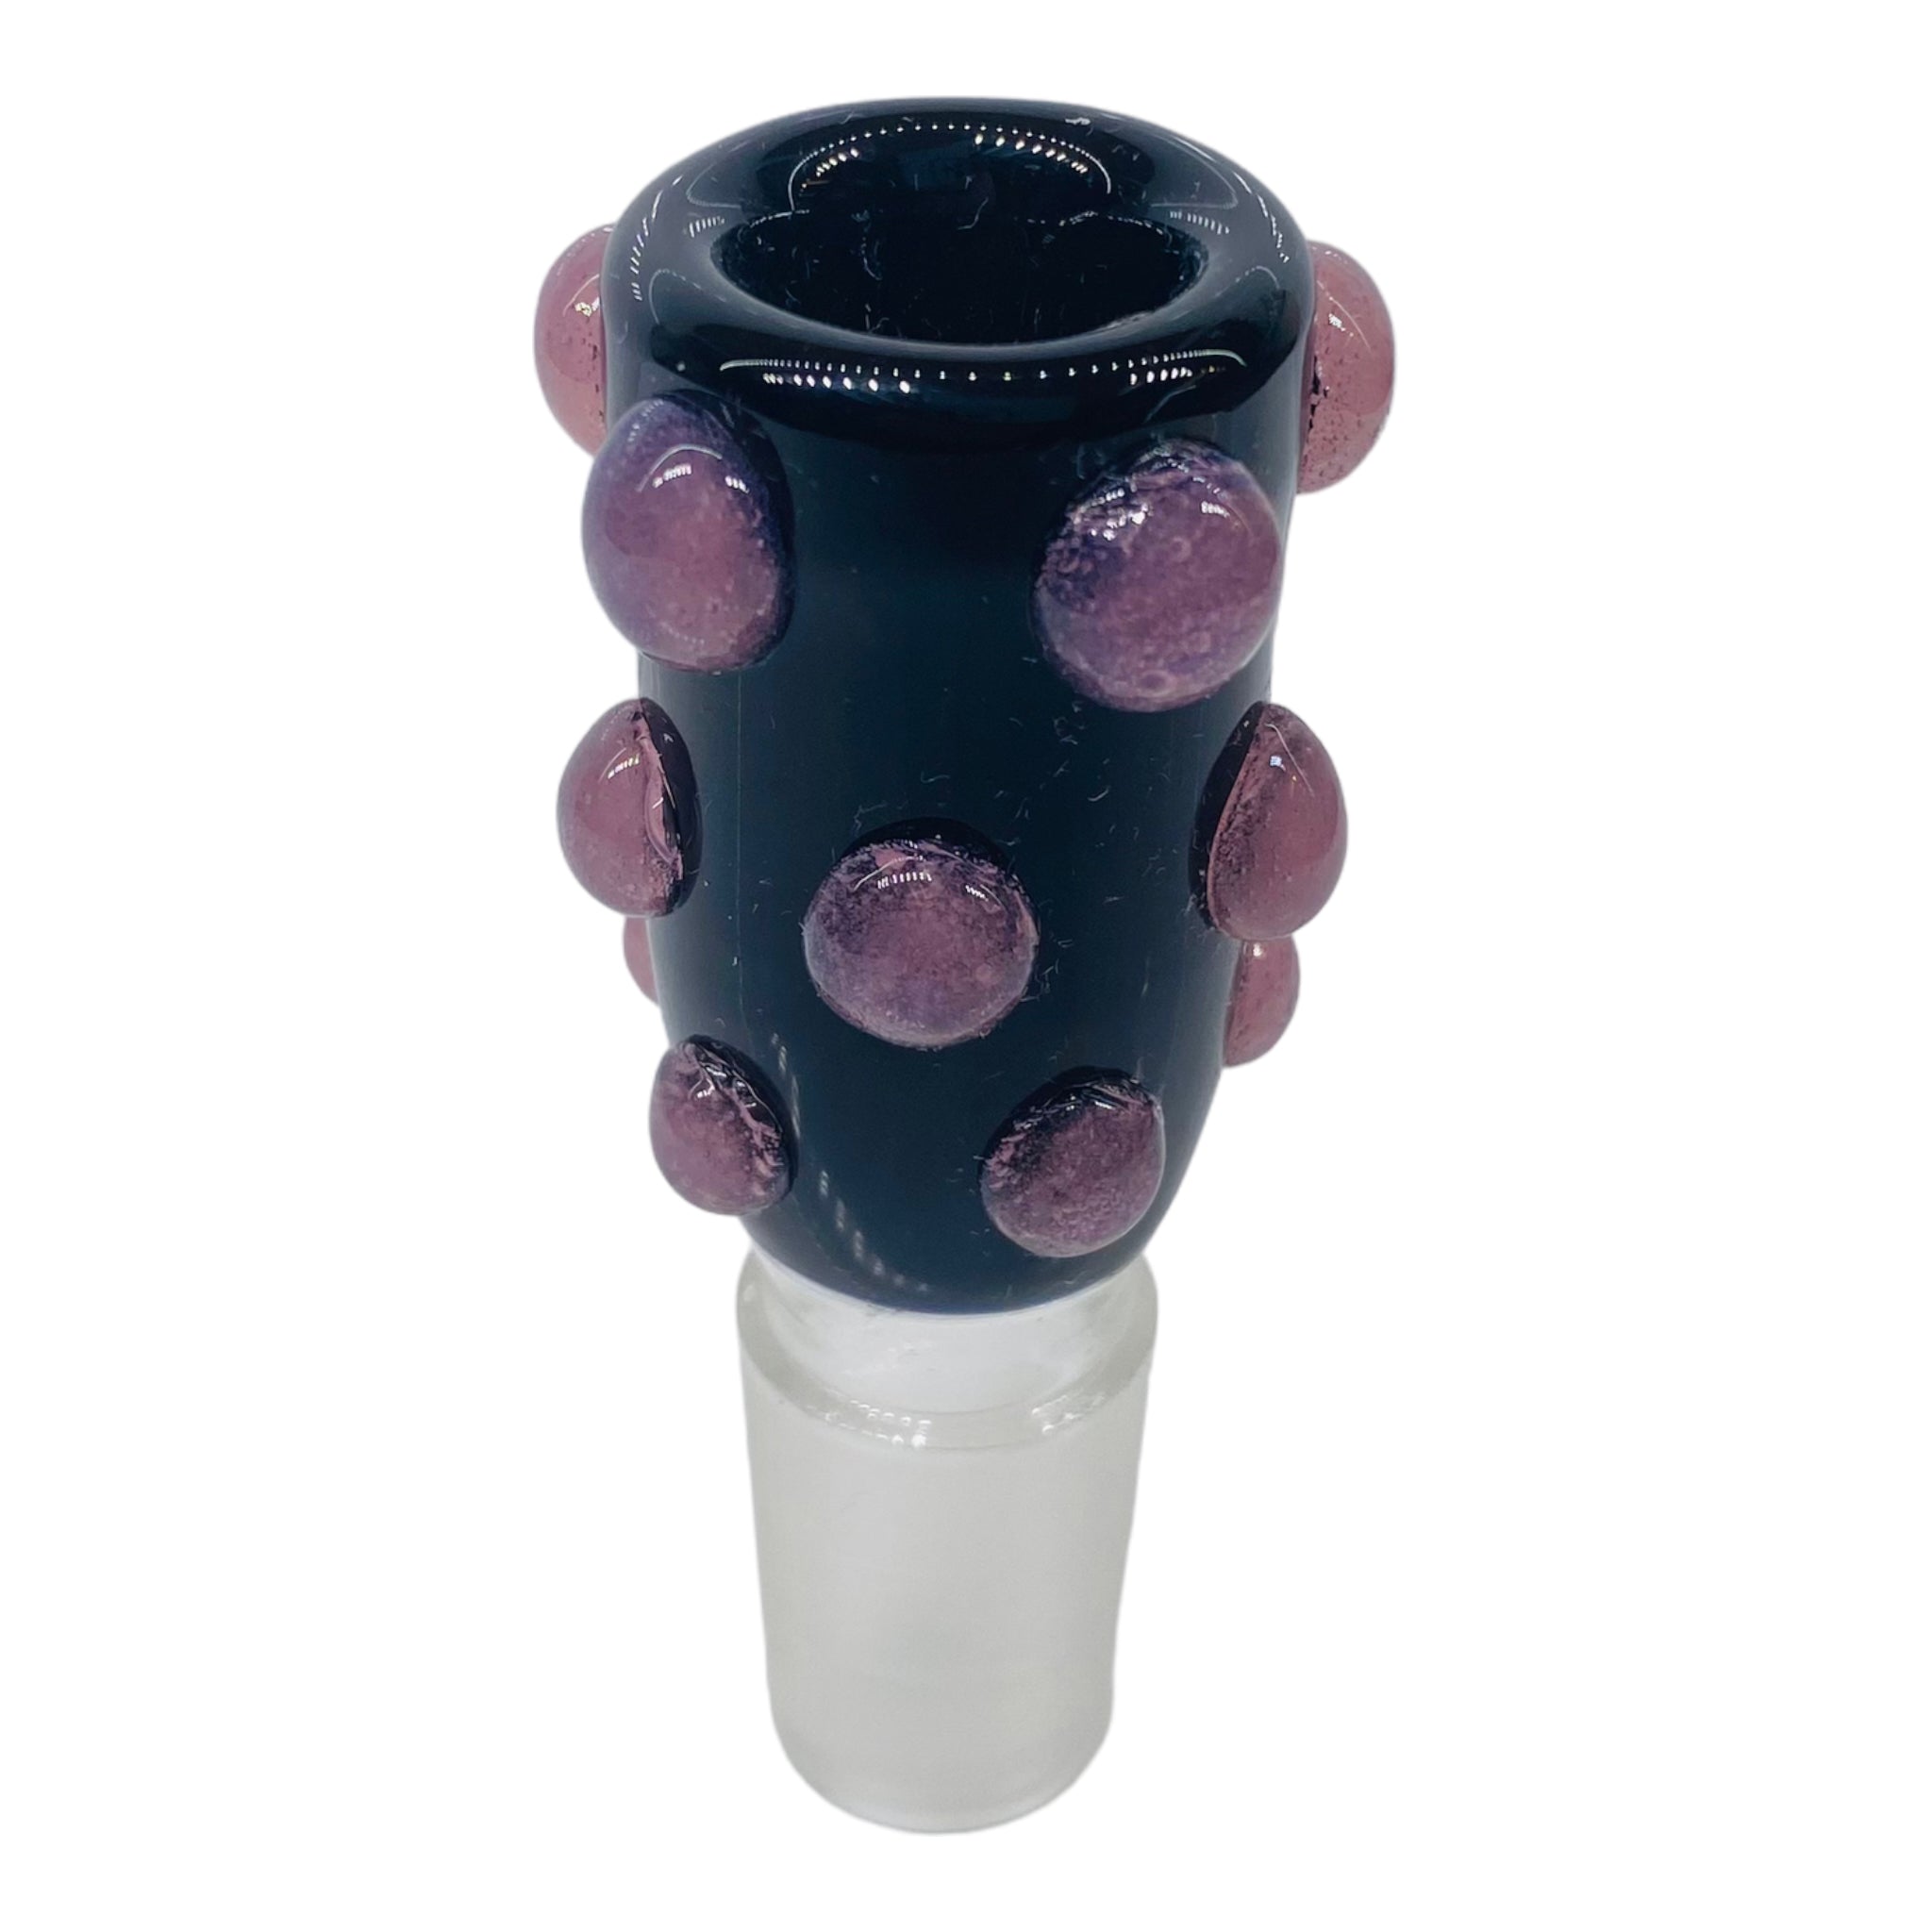 18mm Flower Bowl - Tall Black Bubble With Pink Dots Bong Bowl Piece